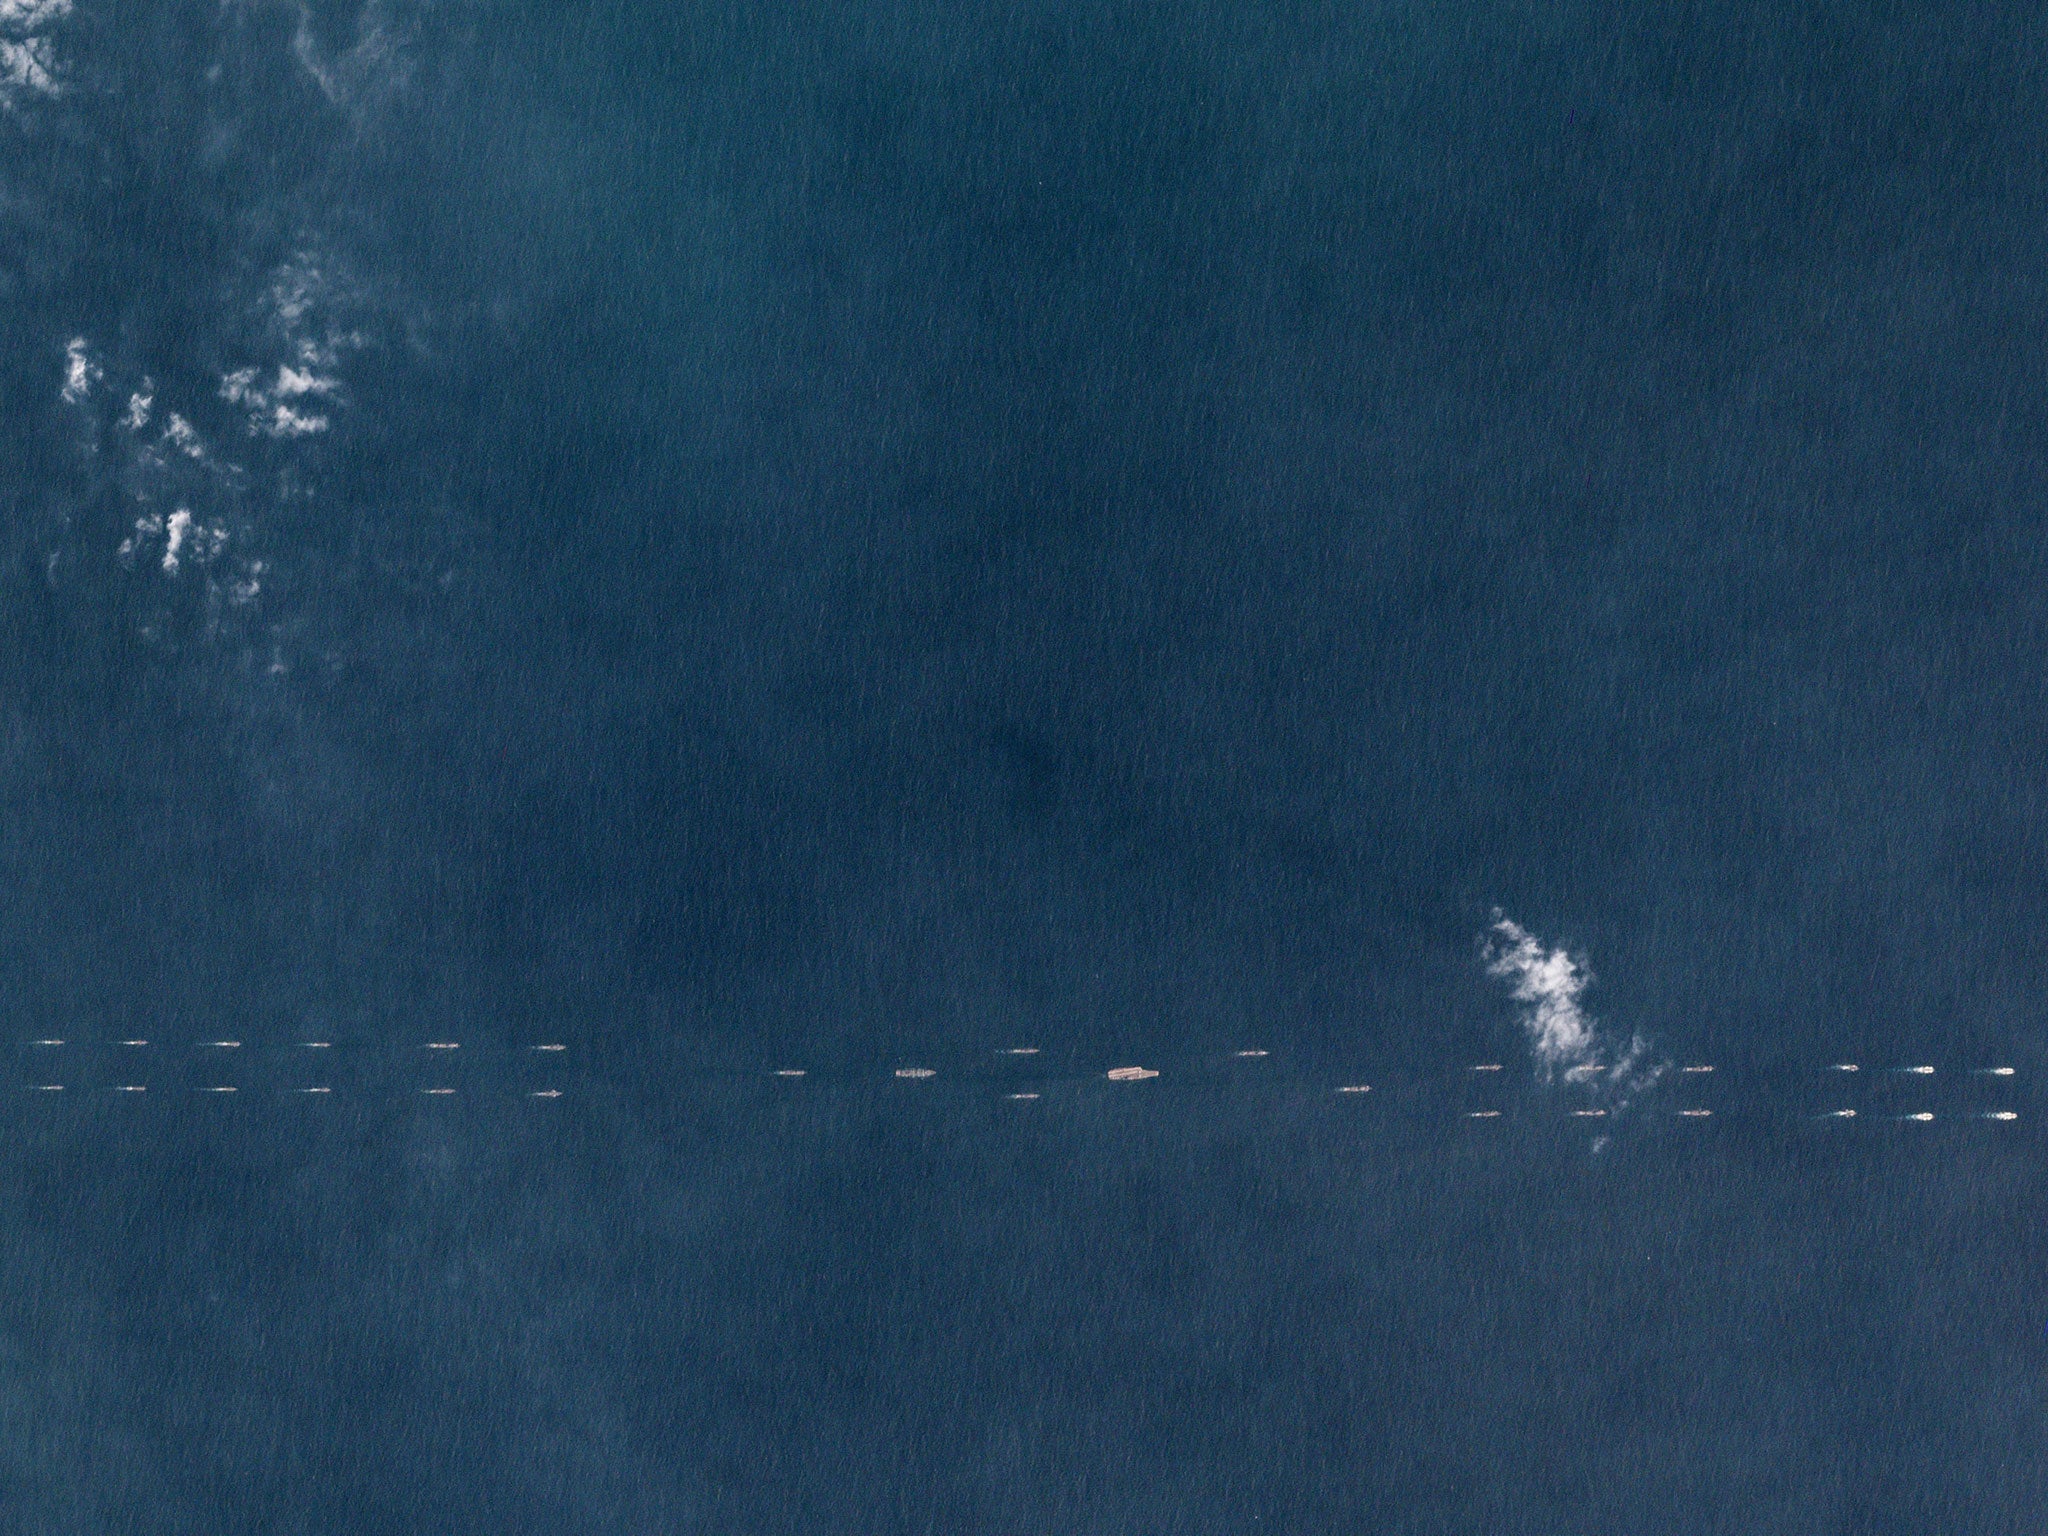 Satellite images show what appear to be at least 40 ships and submarines flanking the carrier, 'Liaoning', supported by aircraft above